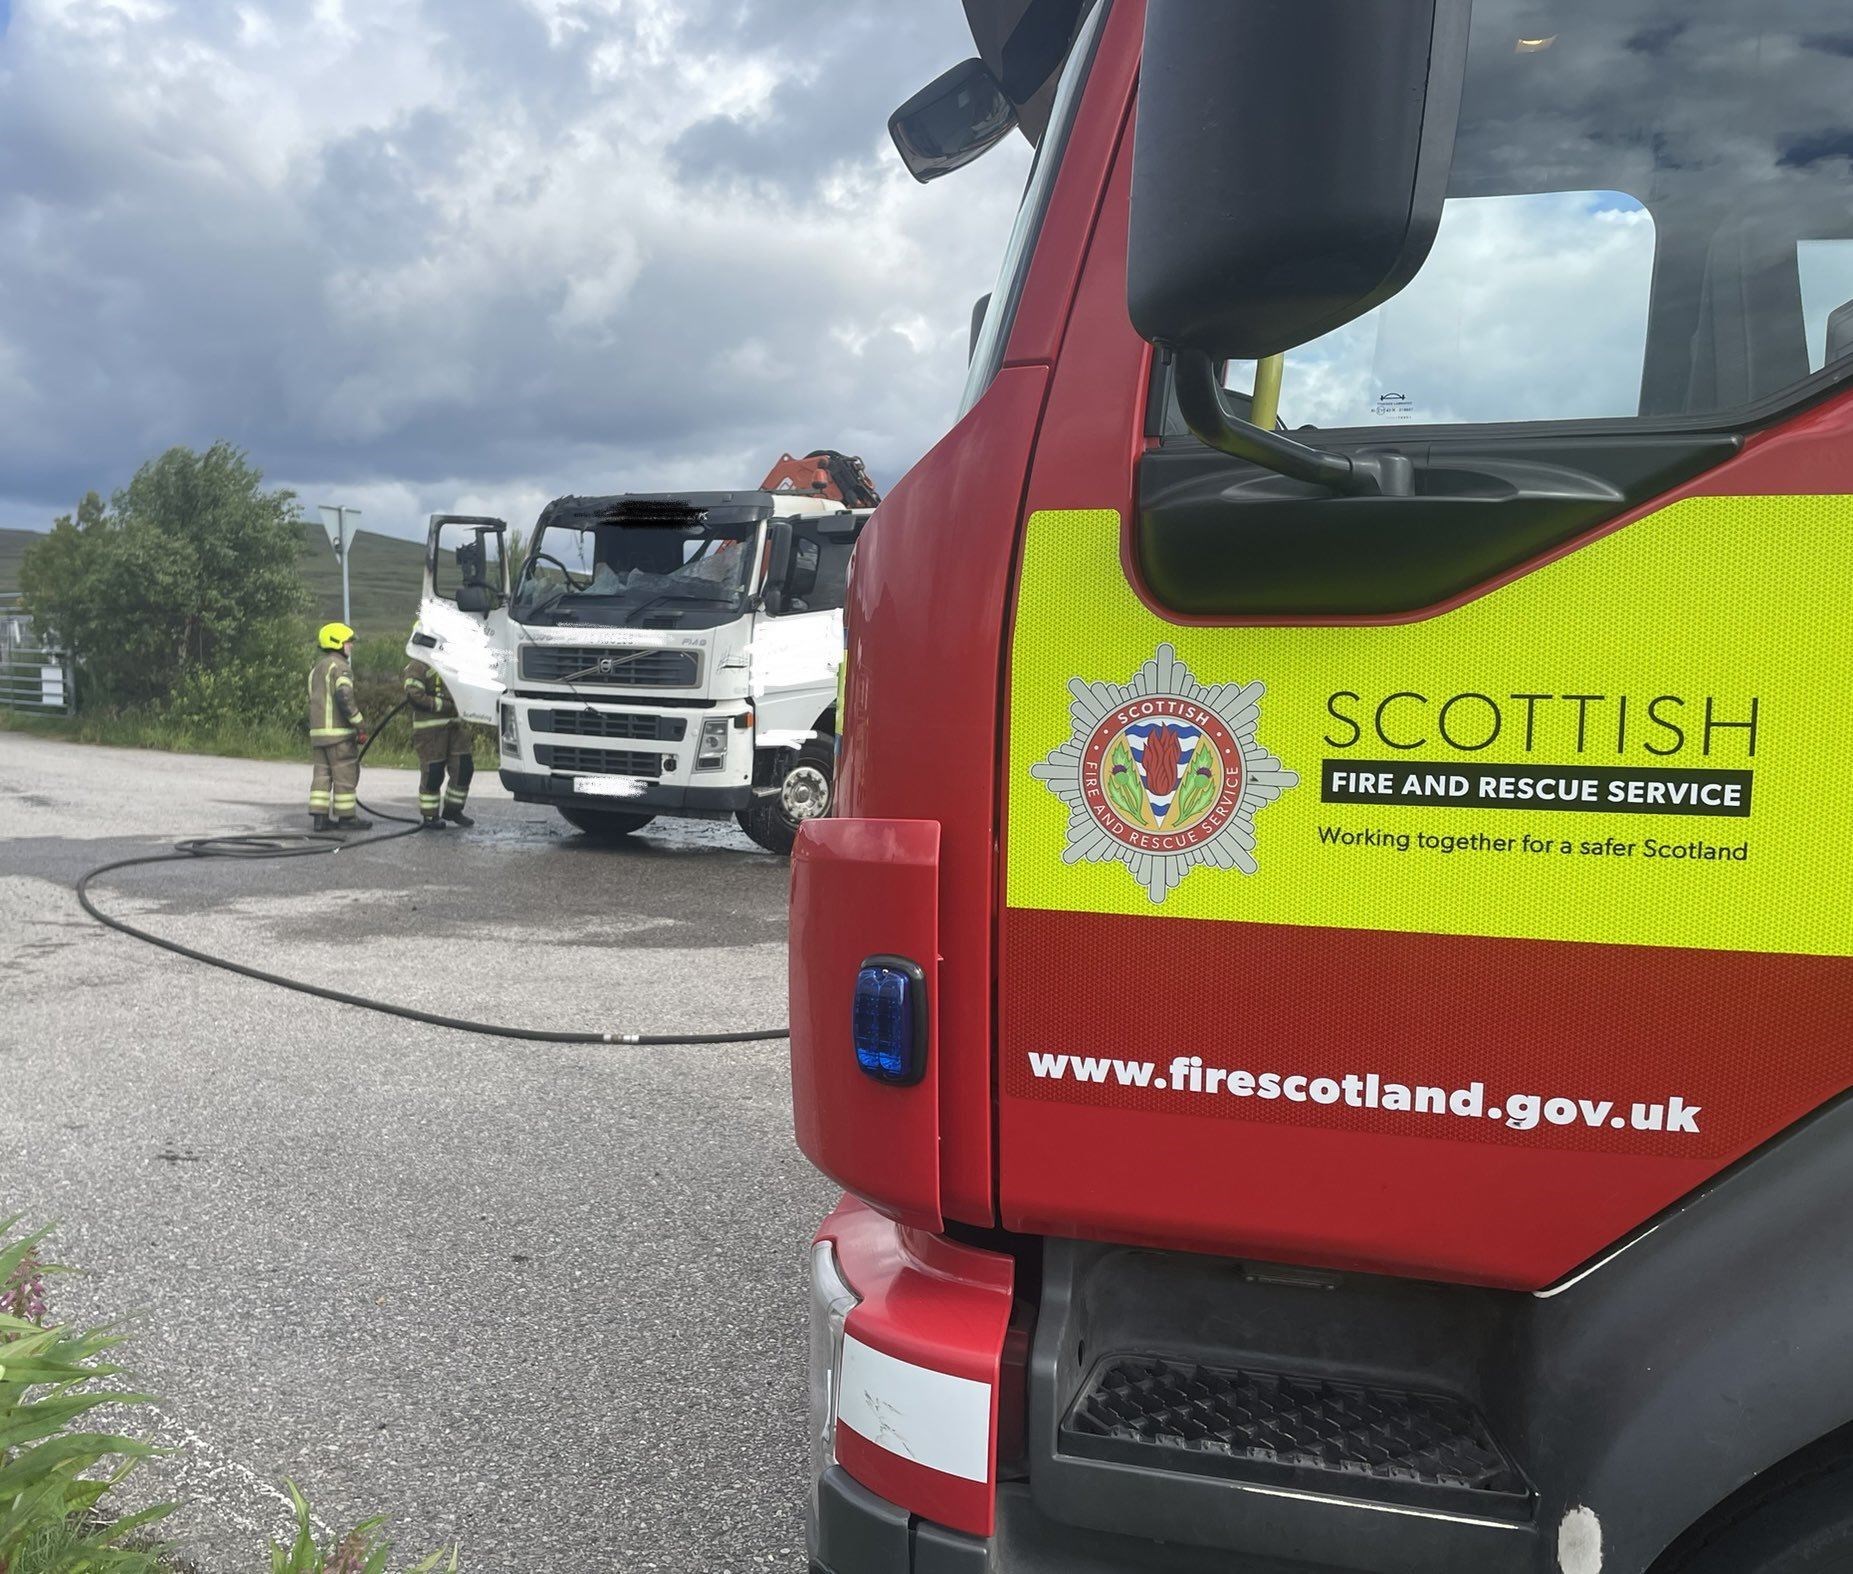 The Invergordon crew helped augment the water supply in the remote location. Picture: Invergordon Fire Station